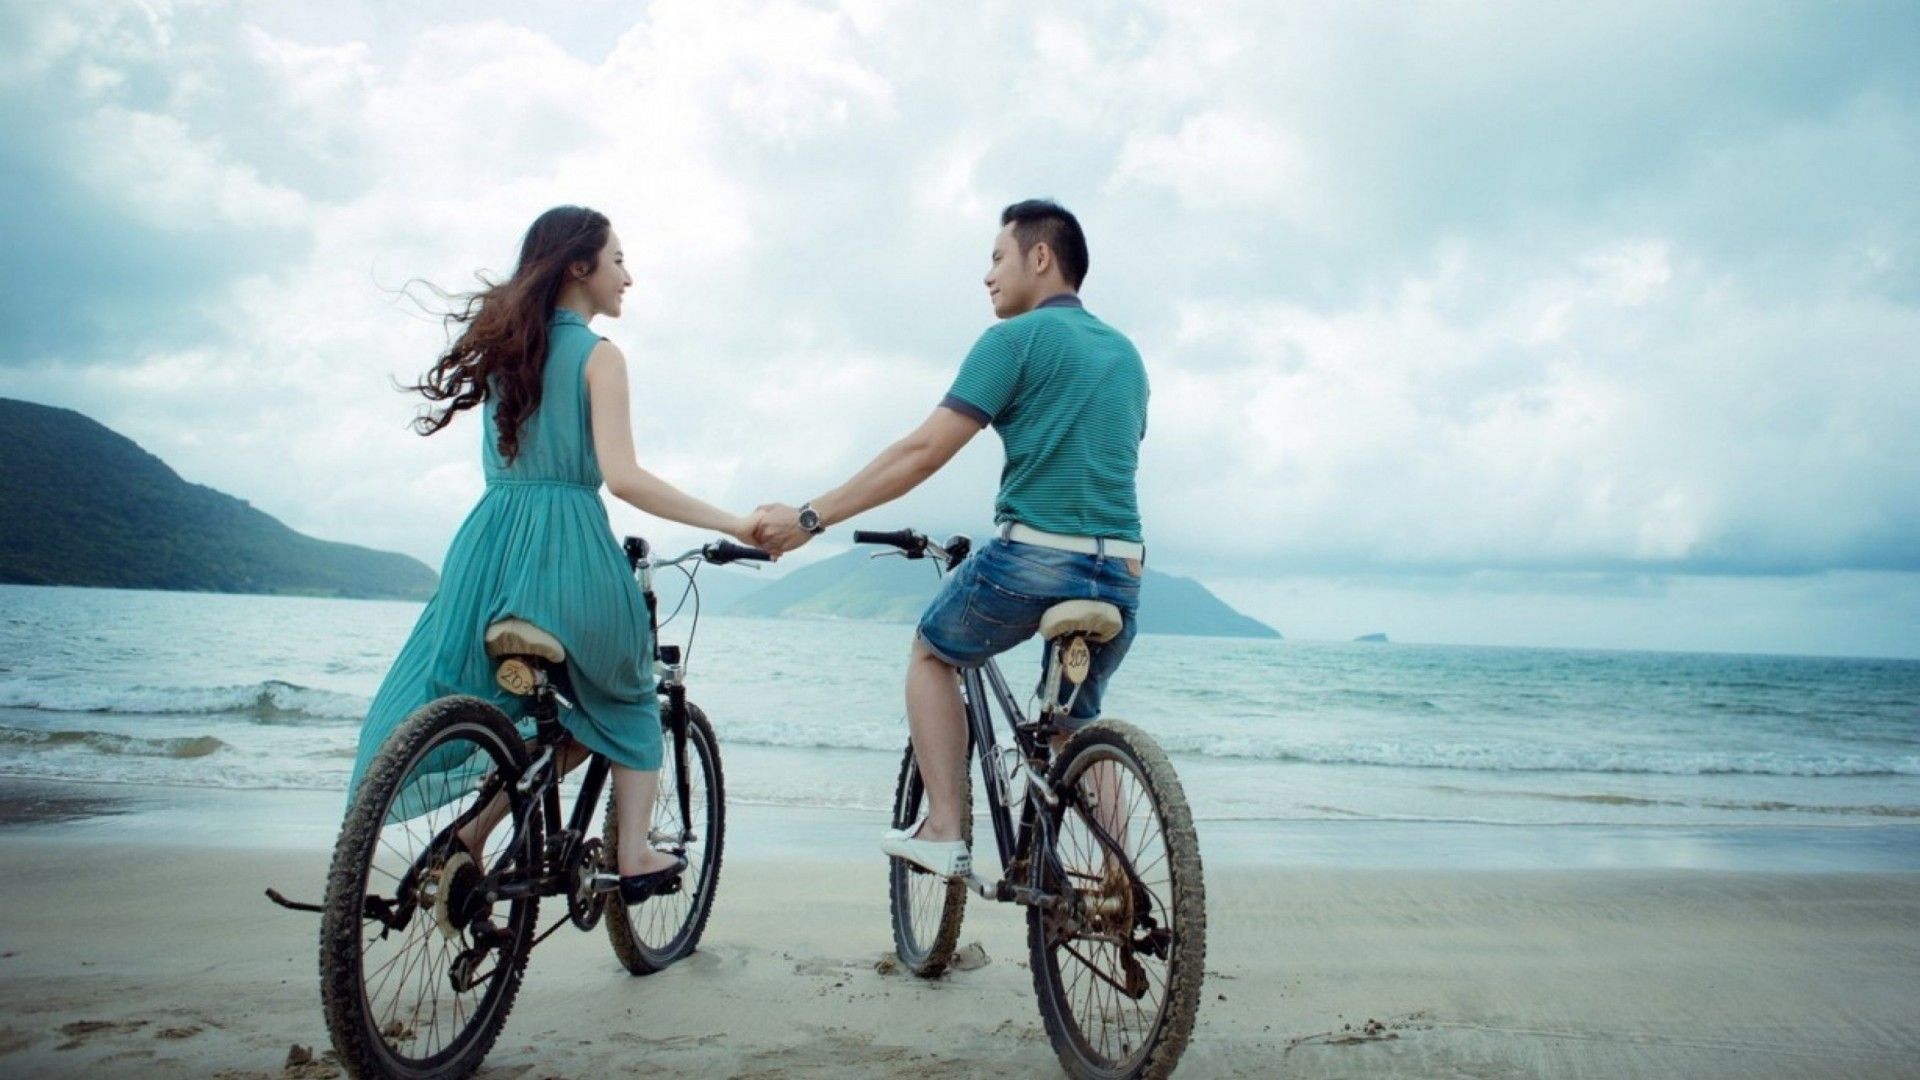 Couple Bicycle Riding On Beach HD Wallpaper 75, Wallpaper13.com